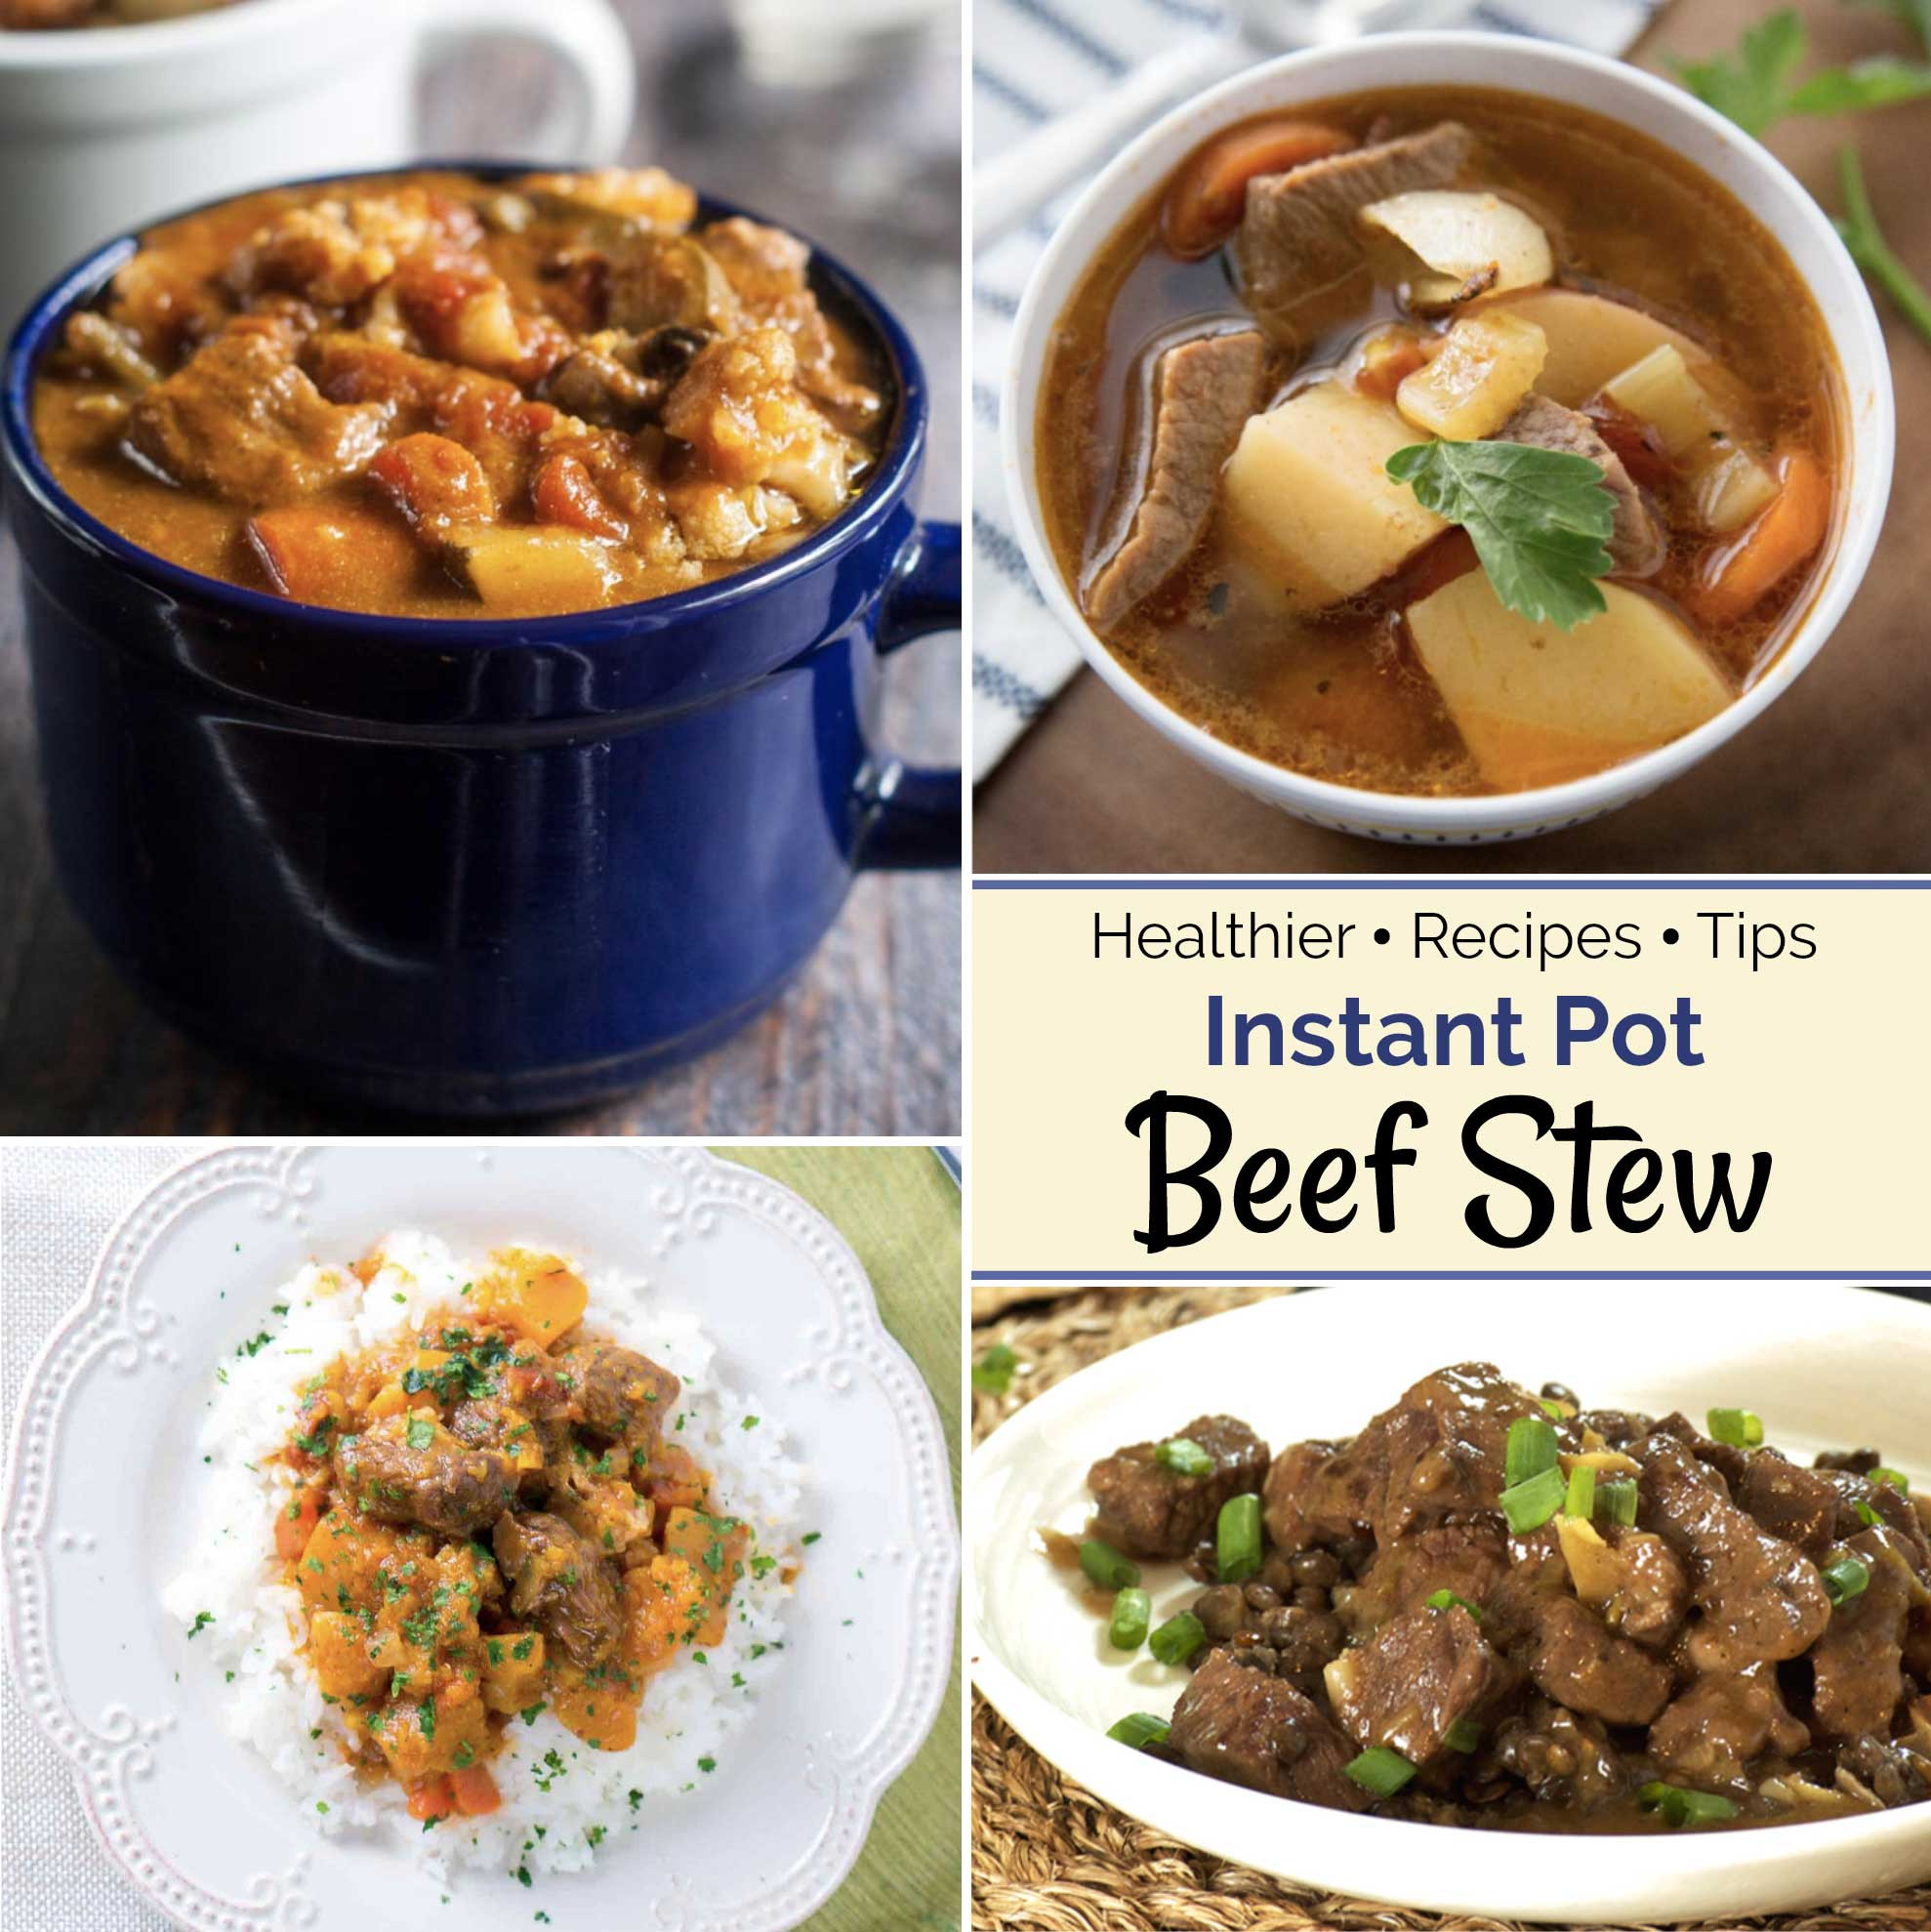 Healthy Beef Stew Recipe
 Healthier Instant Pot Beef Stew Recipes and Tips Two